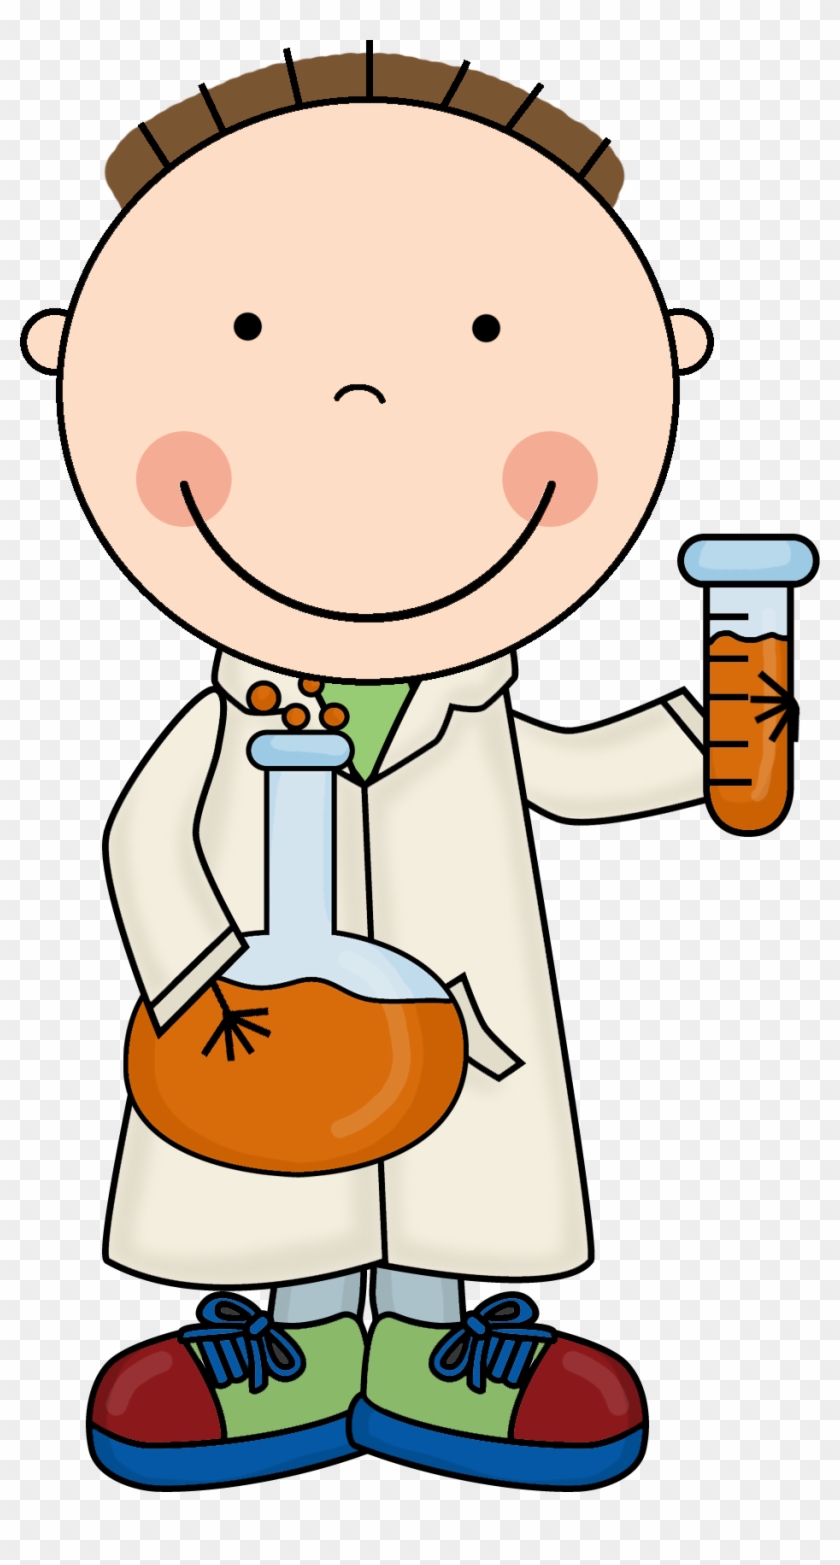 Index Of /images/scrappin Doodles/kids Science Fun - Scrappin Doodles Science #25531